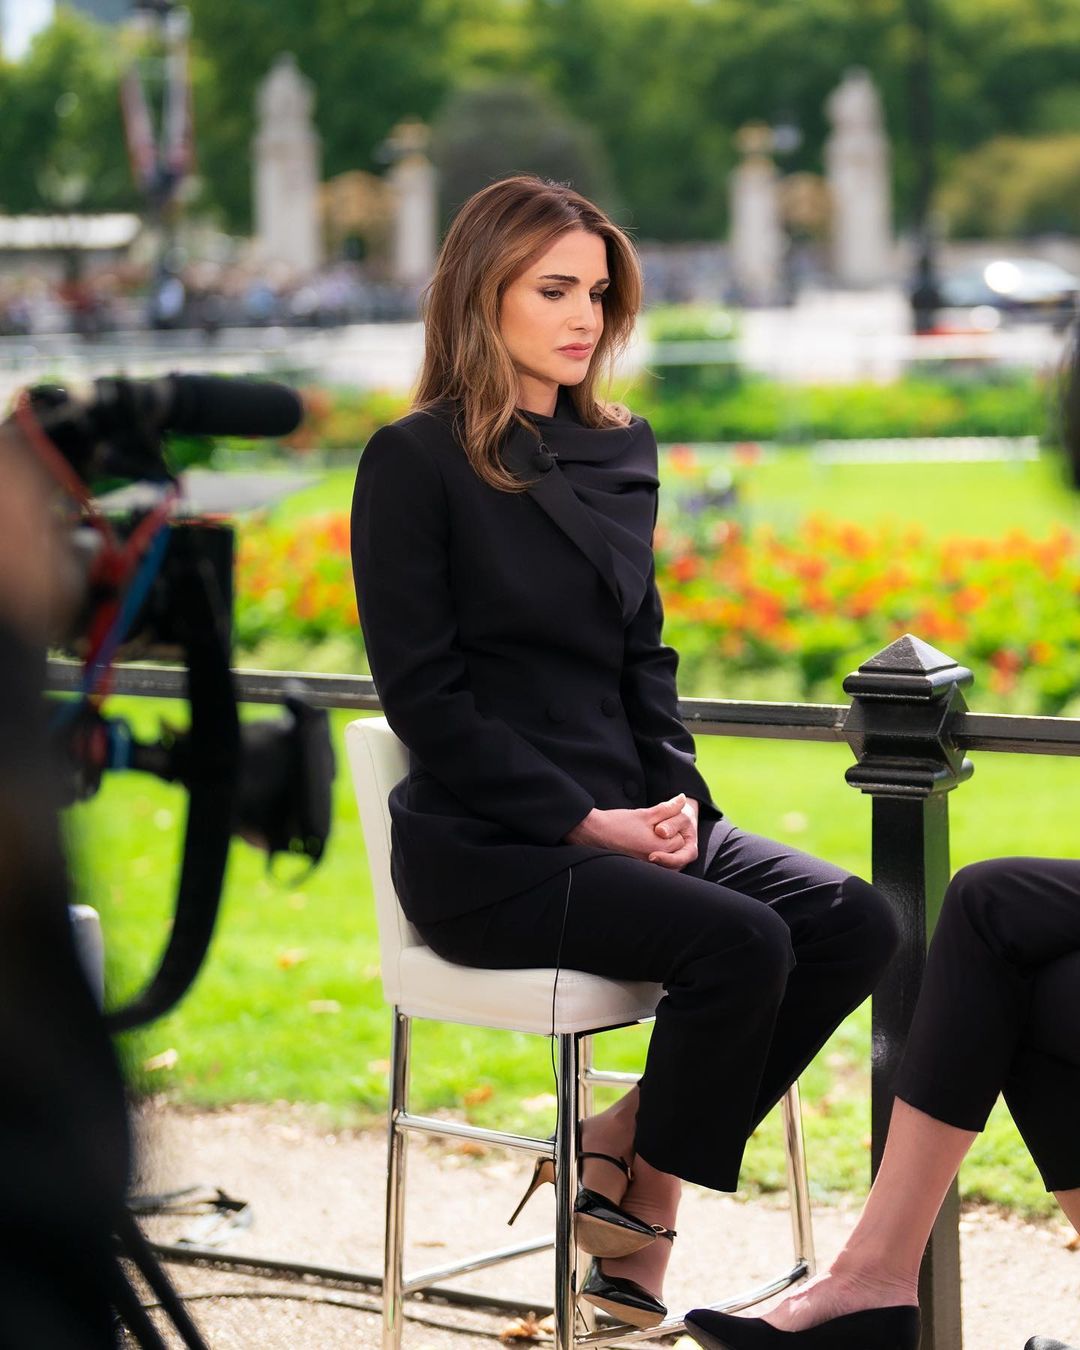 Queen Rania paid a lovely tribute to The Queen Elizabeth II